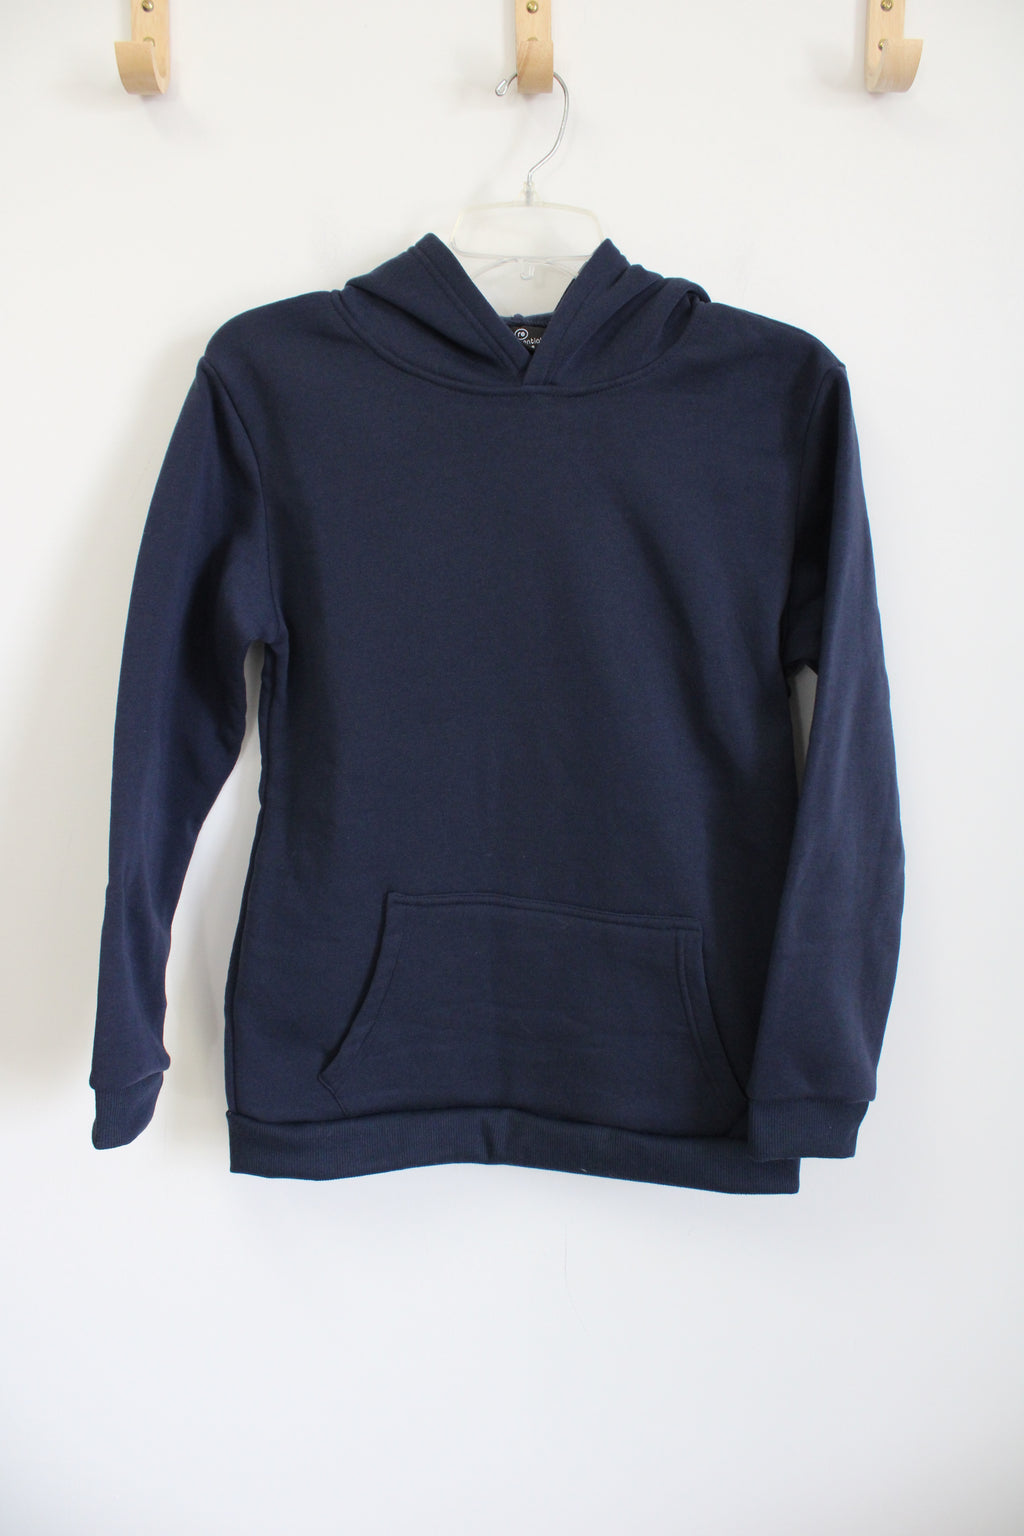 RealEssentials Navy Blue Hoodie | Youth XL (14/16)